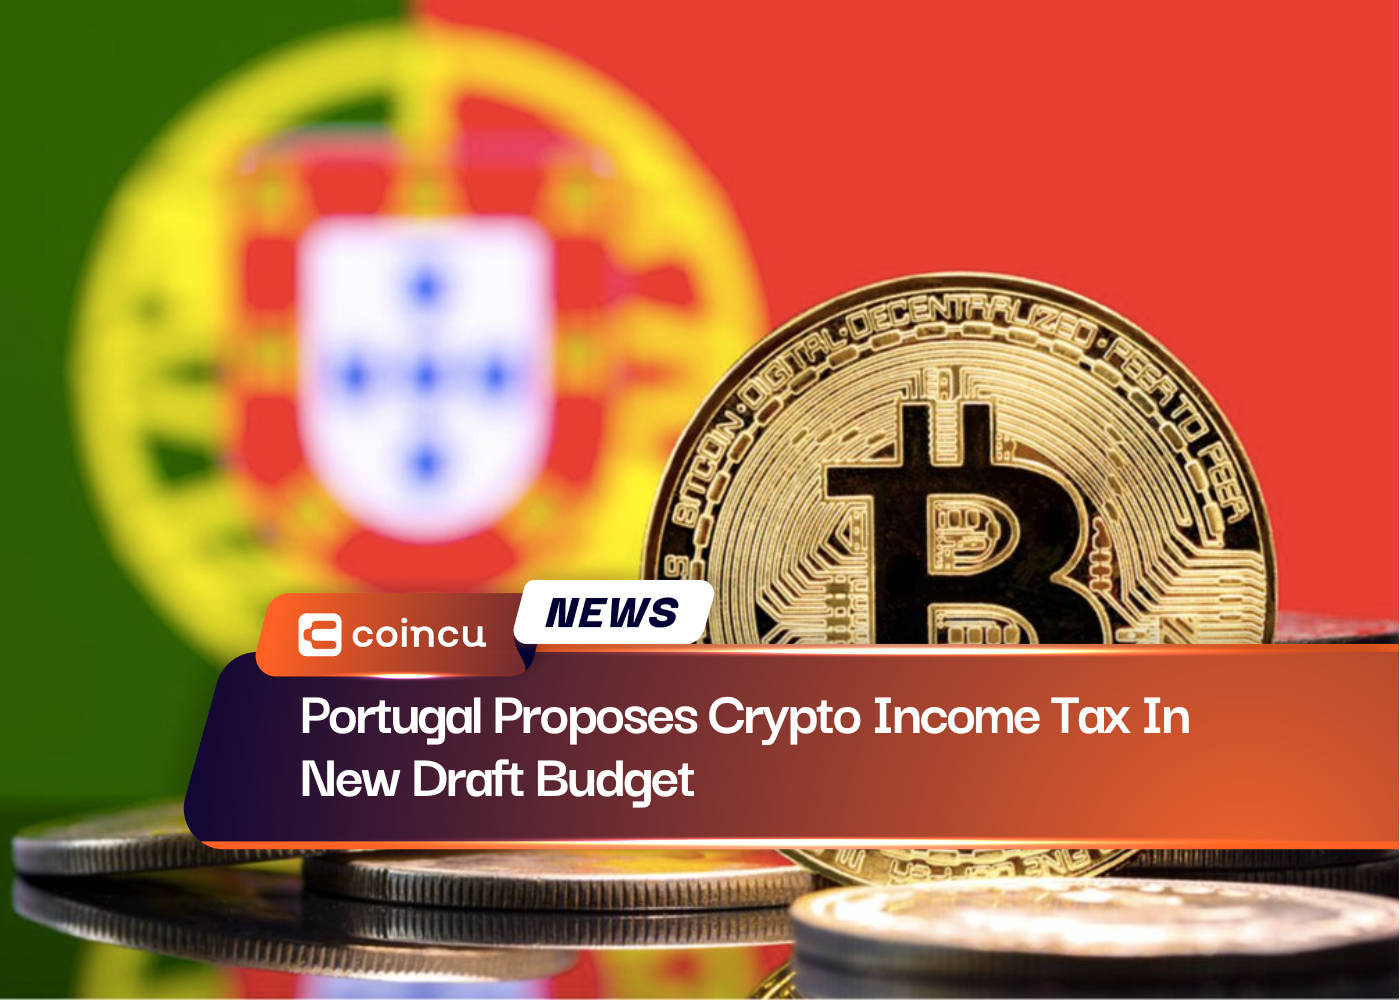 Portugal Proposes Crypto Income Tax In New Draft Budget